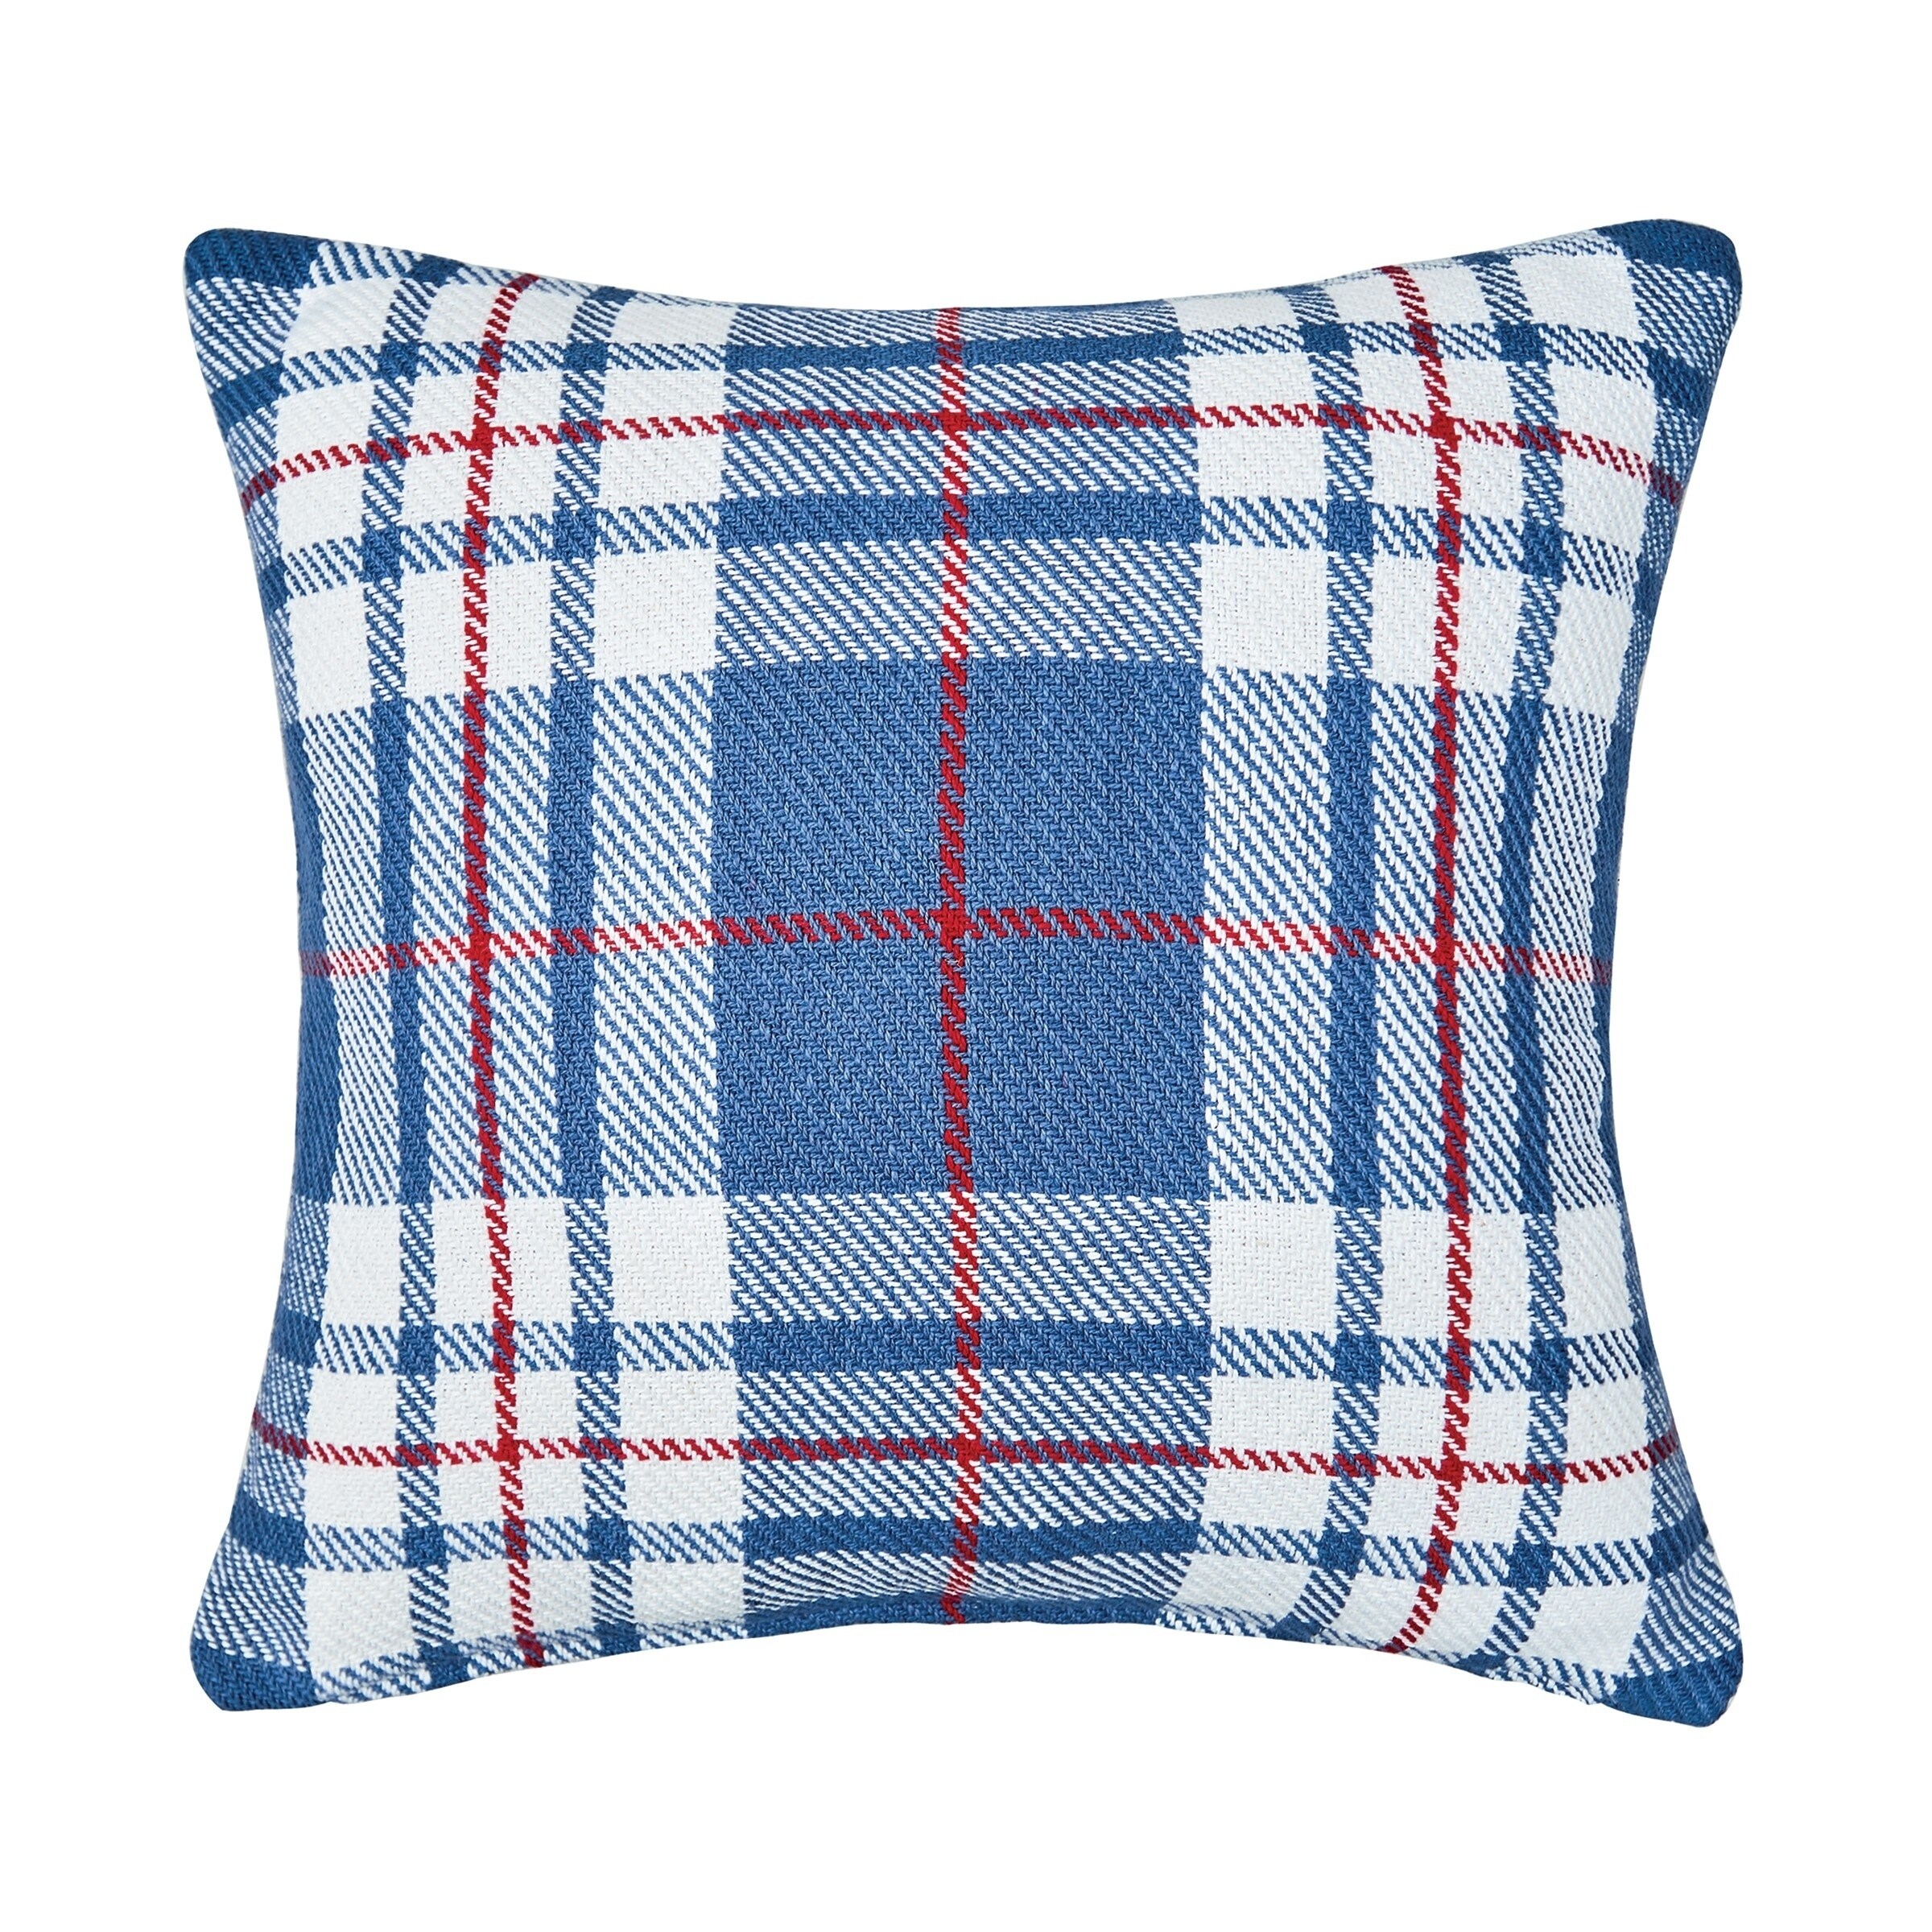 18x18 Inch Plaid Outdoor Pillow Rust Polyester With Polyester Fill